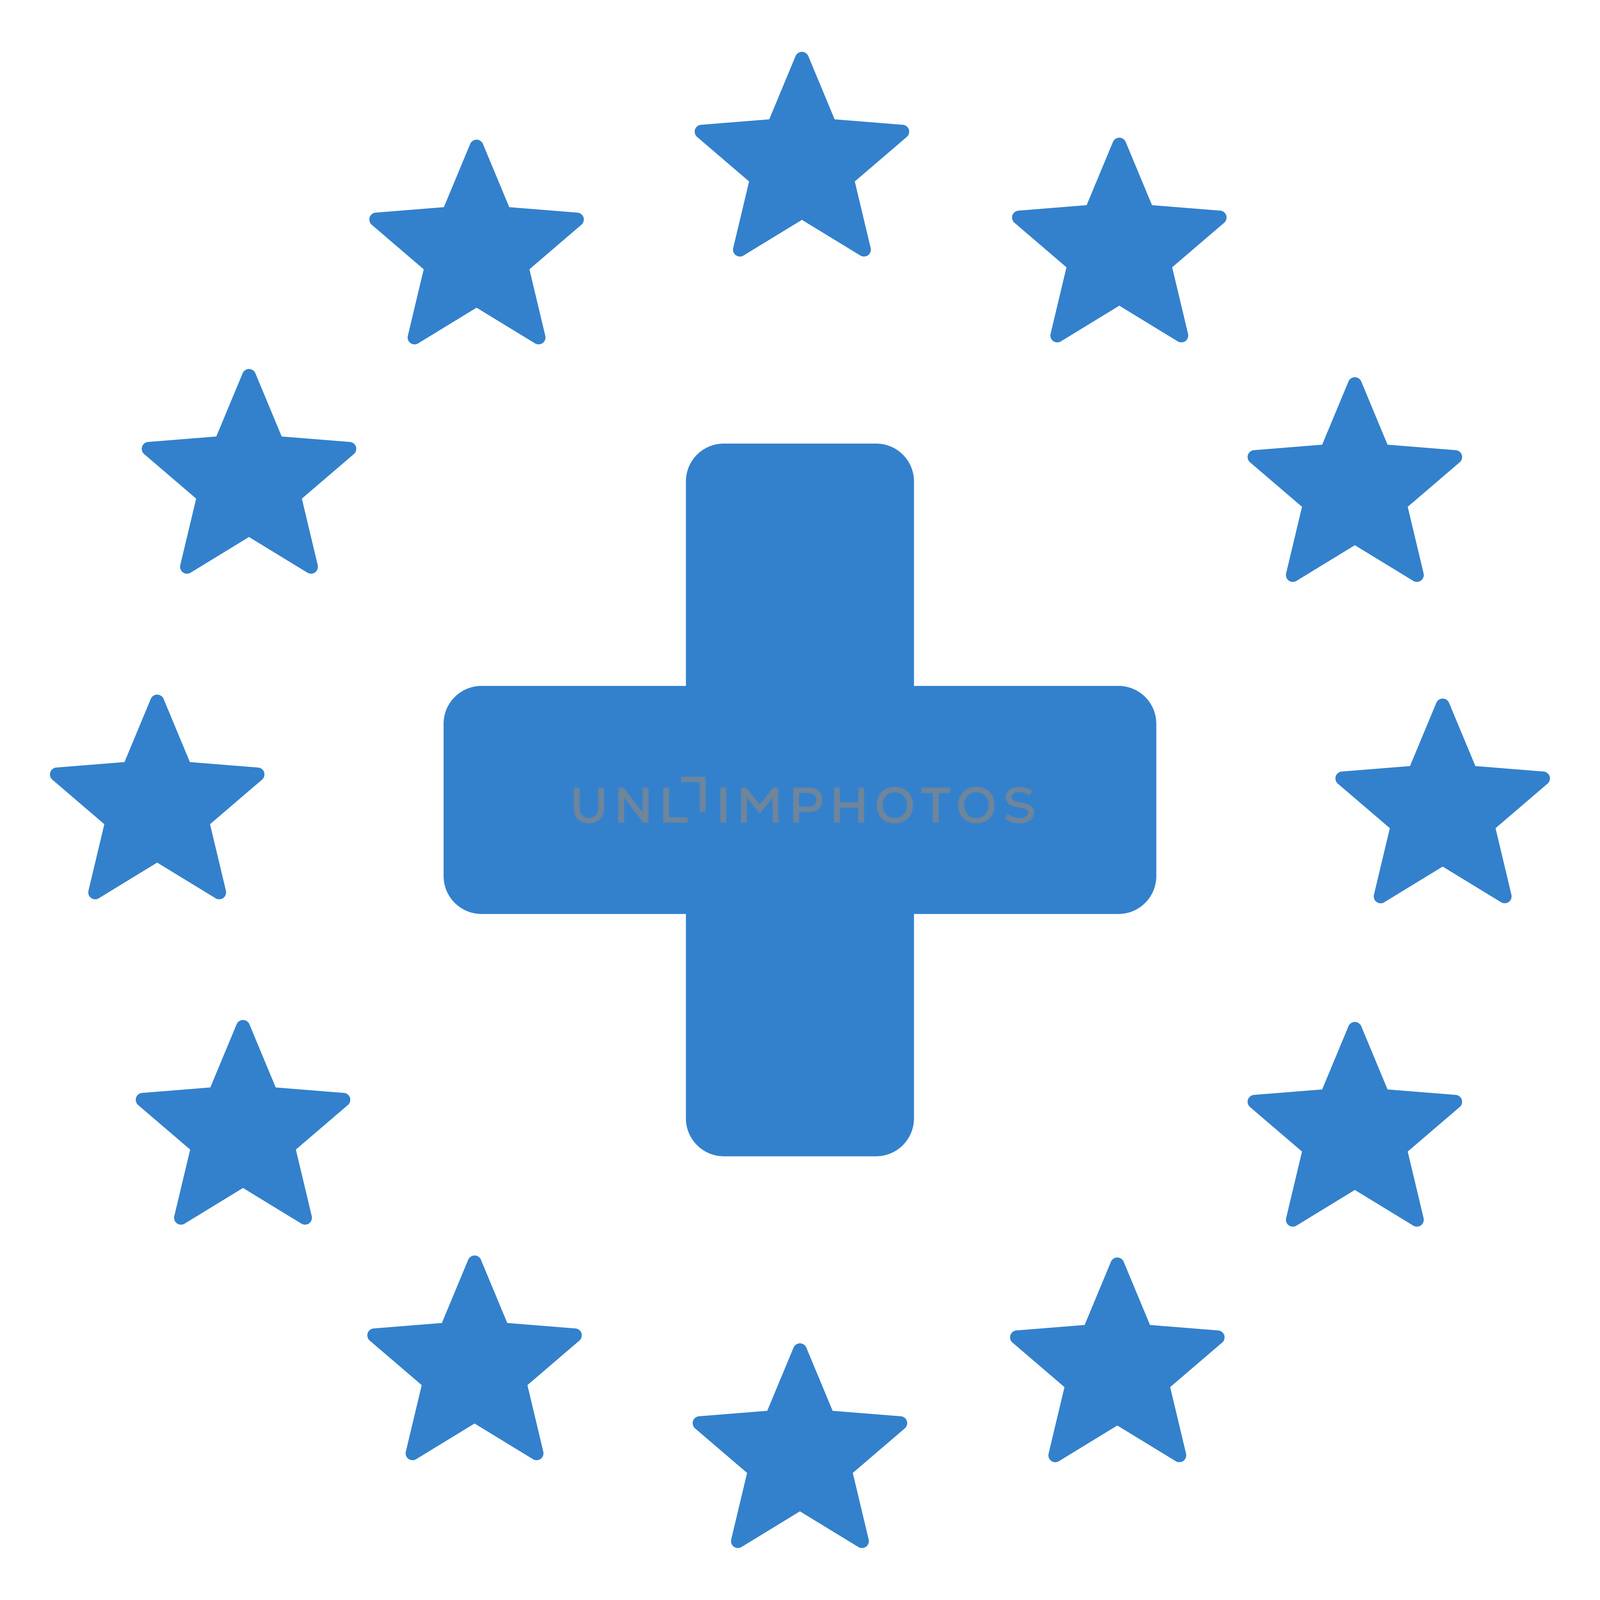 Euro Medicine raster icon. Style is flat symbol, cobalt color, rounded angles, white background.